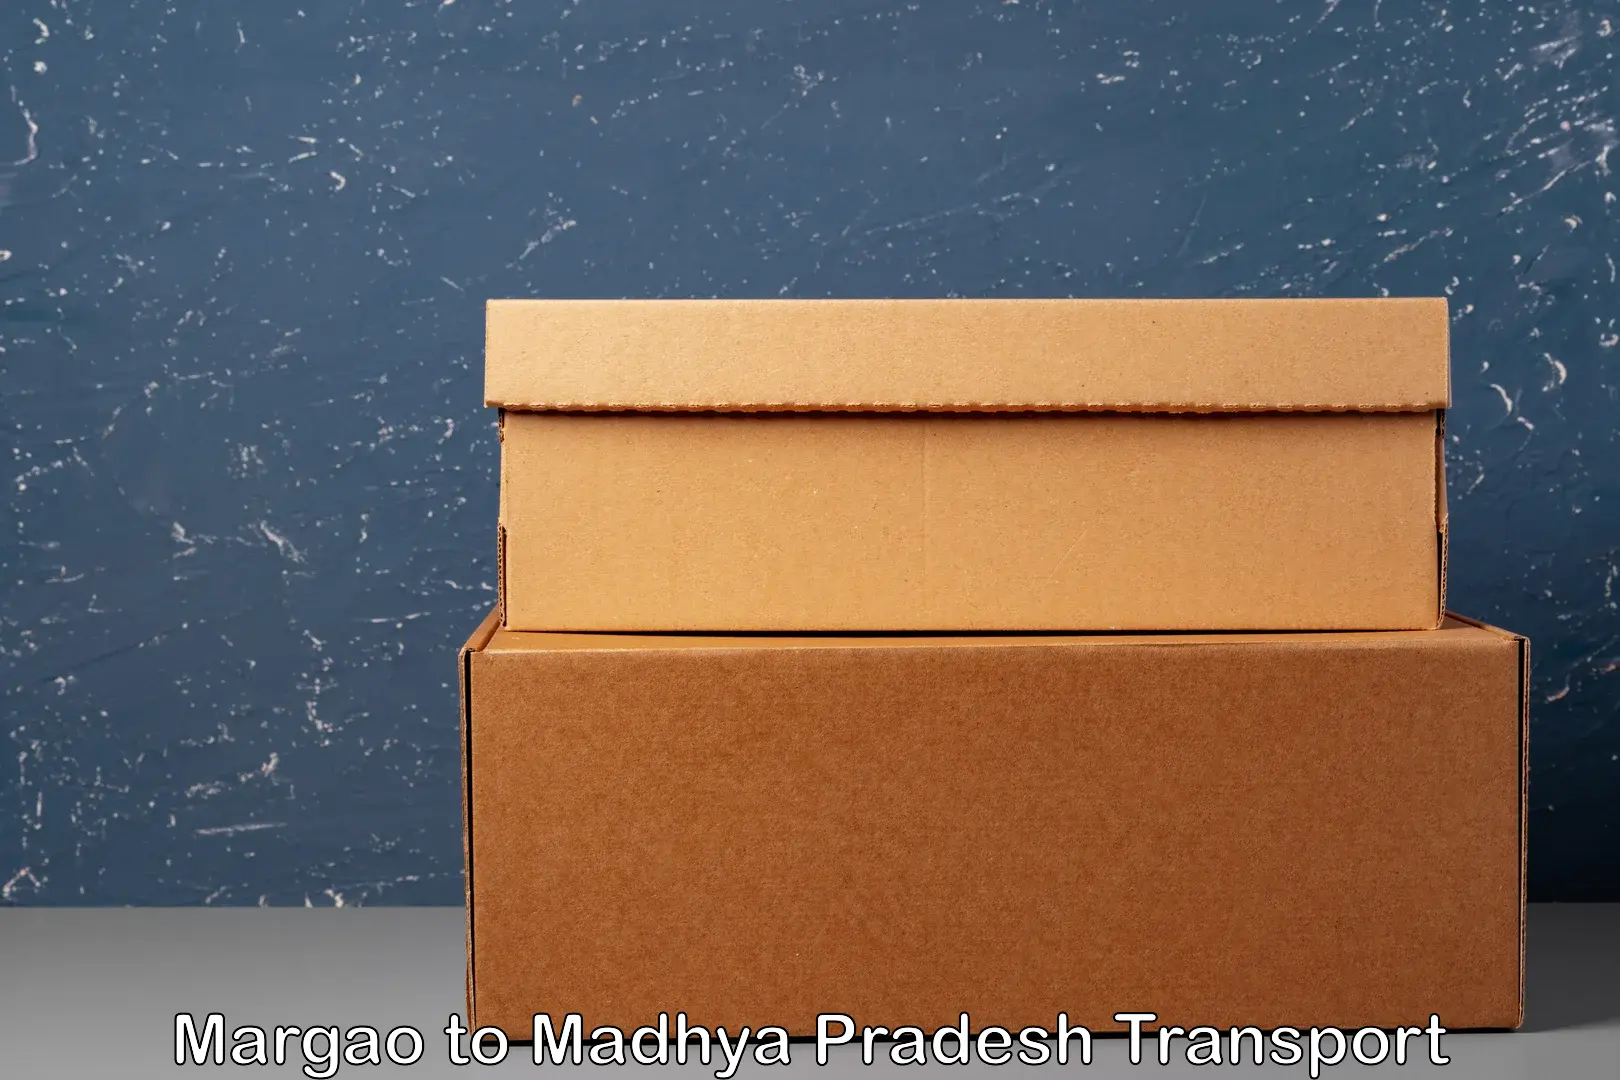 Nationwide transport services Margao to Raipur Karchuliyan